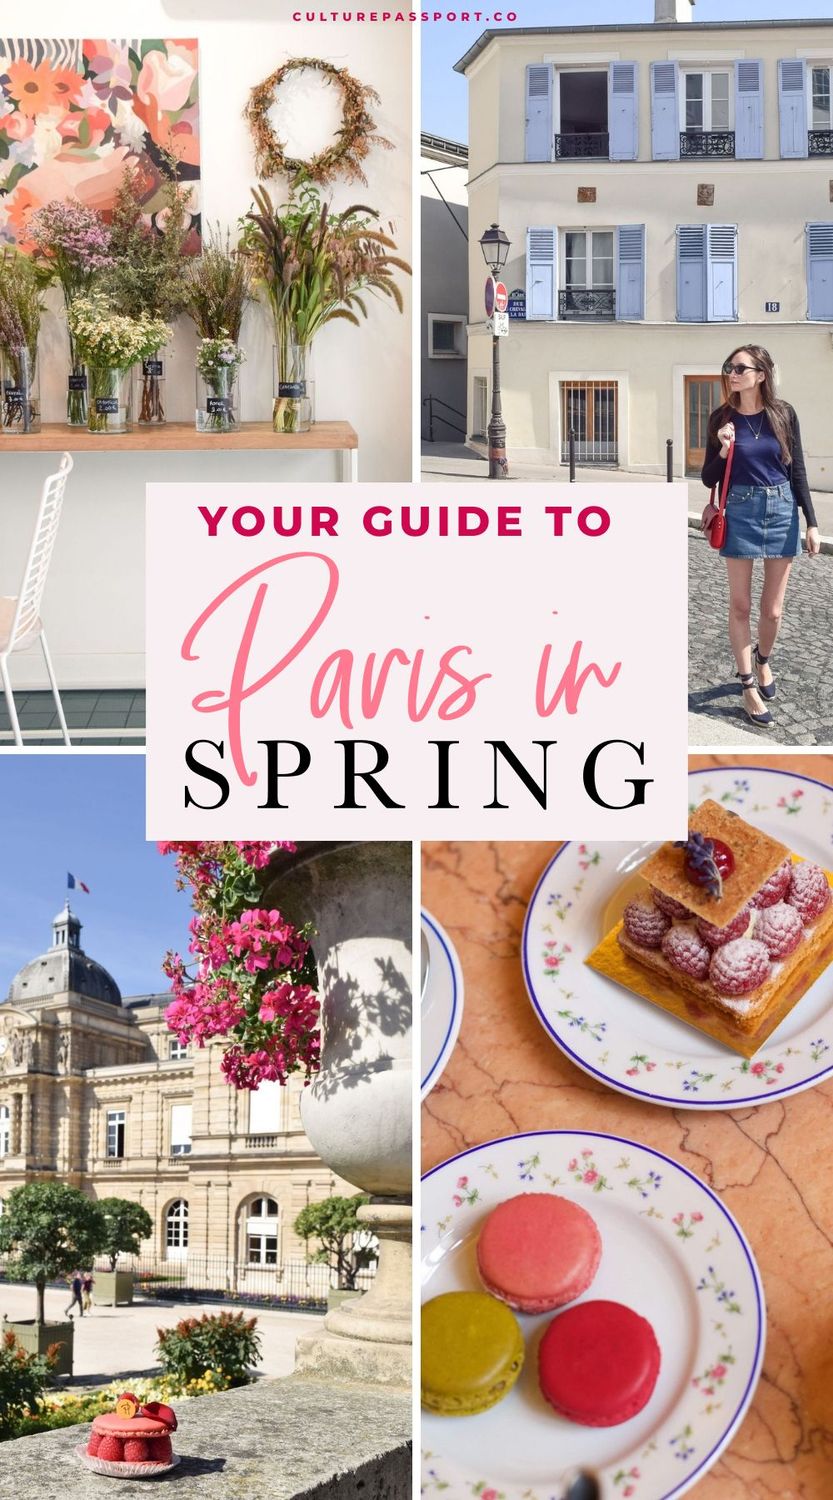 Your Guide To Paris In Spring! Everything you need to know before spending spring in Paris. #parisguide #paristips #springtravel